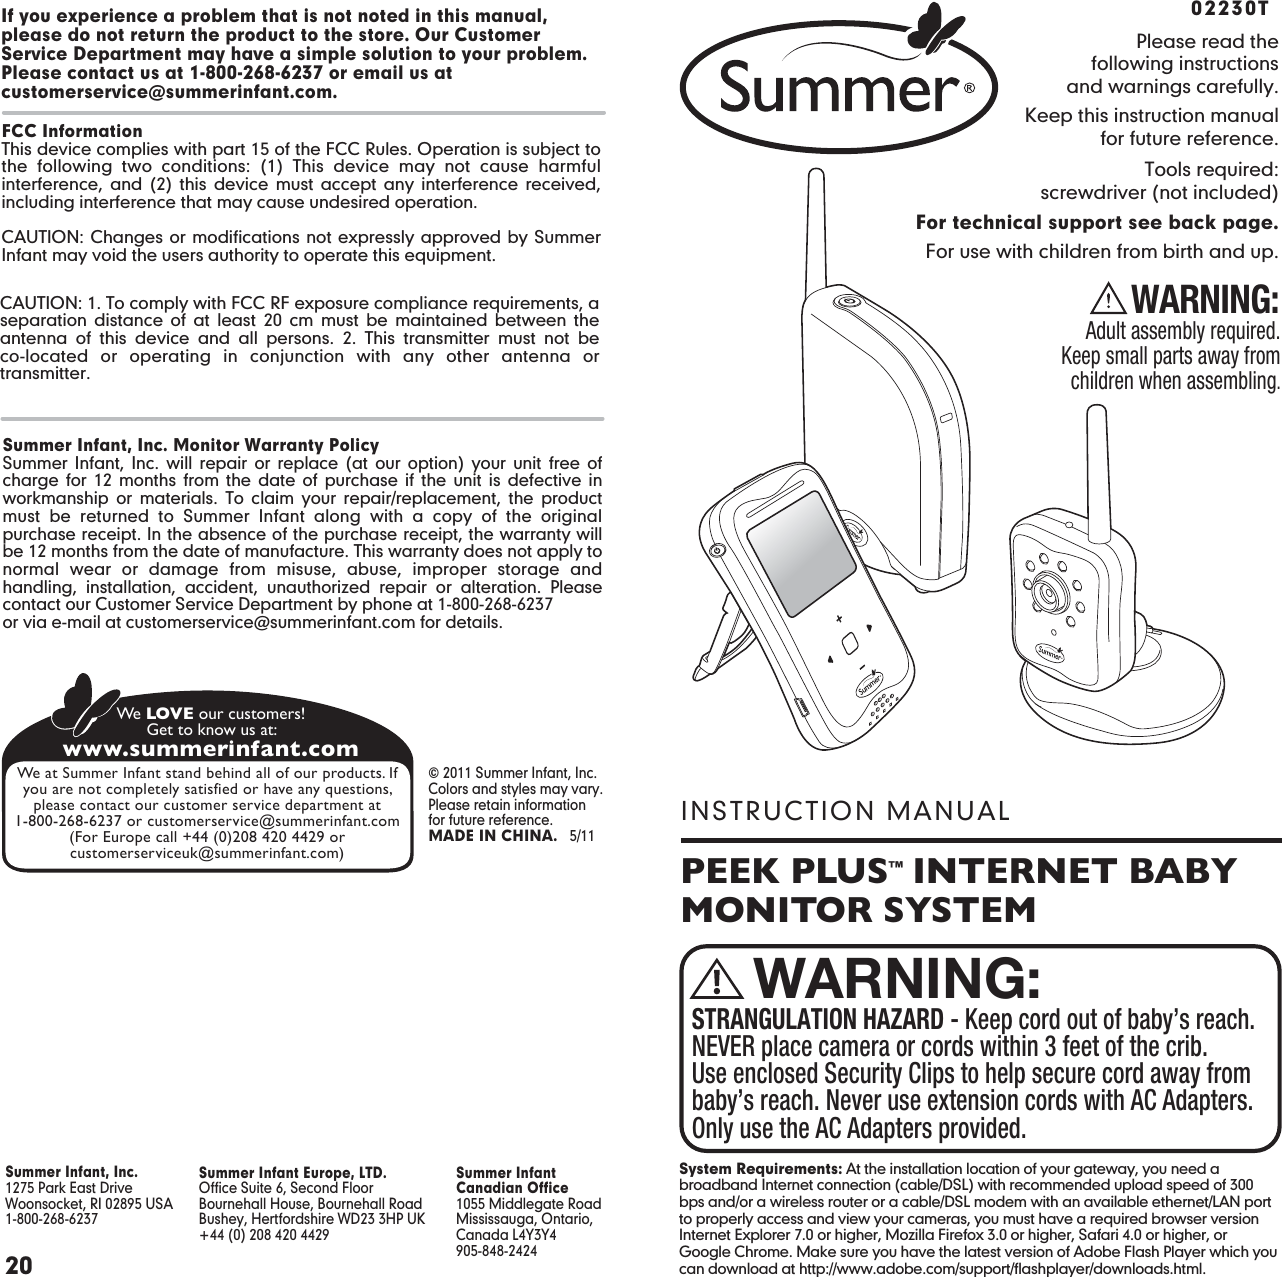 PEEK PLUS™  INTERNET BABY MONITOR SYSTEMINSTRUCTION MANUALPlease read thefollowing instructionsand warnings carefully.Keep this instruction manualfor future reference.Tools required:screwdriver (not included)For technical support see back page.For use with children from birth and up.WARNING:Adult assembly required.Keep small parts away fromchildren when assembling.02230TSTRANGULATION HAZARD - Keep cord out of baby’s reach. NEVER place camera or cords within 3 feet of the crib. Use enclosed Security Clips to help secure cord away from baby’s reach. Never use extension cords with AC Adapters. Only use the AC Adapters provided.WARNING:20Summer Infant Europe, LTD.Office Suite 6, Second FloorBournehall House, Bournehall RoadBushey, Hertfordshire WD23 3HP UK+44 (0) 208 420 4429Summer InfantCanadian Office1055 Middlegate RoadMississauga, Ontario,Canada L4Y3Y4905-848-2424Summer Infant, Inc.1275 Park East DriveWoonsocket, RI 02895 USA 1-800-268-6237 © 2011 Summer Infant, Inc.Colors and styles may vary.Please retain information for future reference.MADE IN CHINA.   5/11www.summerinfant.comWe LOVE our customers!Get to know us at:We at Summer Infant stand behind all of our products. Ifyou are not completely satisfied or have any questions,please contact our customer service department at1-800-268-6237 or customerservice@summerinfant.com(For Europe call +44 (0)208 420 4429 orcustomerserviceuk@summerinfant.com)Summer Infant, Inc. Monitor Warranty PolicySummer Infant, Inc. will repair or replace (at our option) your unit free of charge for 12 months from the date of purchase if the unit is defective in workmanship or materials. To claim your repair/replacement, the product must be returned to Summer Infant along with a copy of the original purchase receipt. In the absence of the purchase receipt, the warranty will be 12 months from the date of manufacture. This warranty does not apply to normal wear or damage from misuse, abuse, improper storage and handling, installation, accident, unauthorized repair or alteration. Please contact our Customer Service Department by phone at 1-800-268-6237or via e-mail at customerservice@summerinfant.com for details.If you experience a problem that is not noted in this manual, please do not return the product to the store. Our Customer Service Department may have a simple solution to your problem. Please contact us at 1-800-268-6237 or email us at customerservice@summerinfant.com.FCC InformationThis device complies with part 15 of the FCC Rules. Operation is subject to the following two conditions: (1) This device may not cause harmful interference, and (2) this device must accept any interference received, including interference that may cause undesired operation.CAUTION: Changes or modifications not expressly approved by Summer Infant may void the users authority to operate this equipment.CAUTION: 1. To comply with FCC RF exposure compliance requirements, a separation distance of at least 20 cm must be maintained between the antenna of this device and all persons. 2. This transmitter must not be co-located or operating in conjunction with any other antenna or transmitter.PAGE 20System Requirements: At the installation location of your gateway, you need a broadband Internet connection (cable/DSL) with recommended upload speed of 300 bps and/or a wireless router or a cable/DSL modem with an available ethernet/LAN port to properly access and view your cameras, you must have a required browser version Internet Explorer 7.0 or higher, Mozilla Firefox 3.0 or higher, Safari 4.0 or higher, or Google Chrome. Make sure you have the latest version of Adobe Flash Player which you can download at http://www.adobe.com/support/flashplayer/downloads.html.